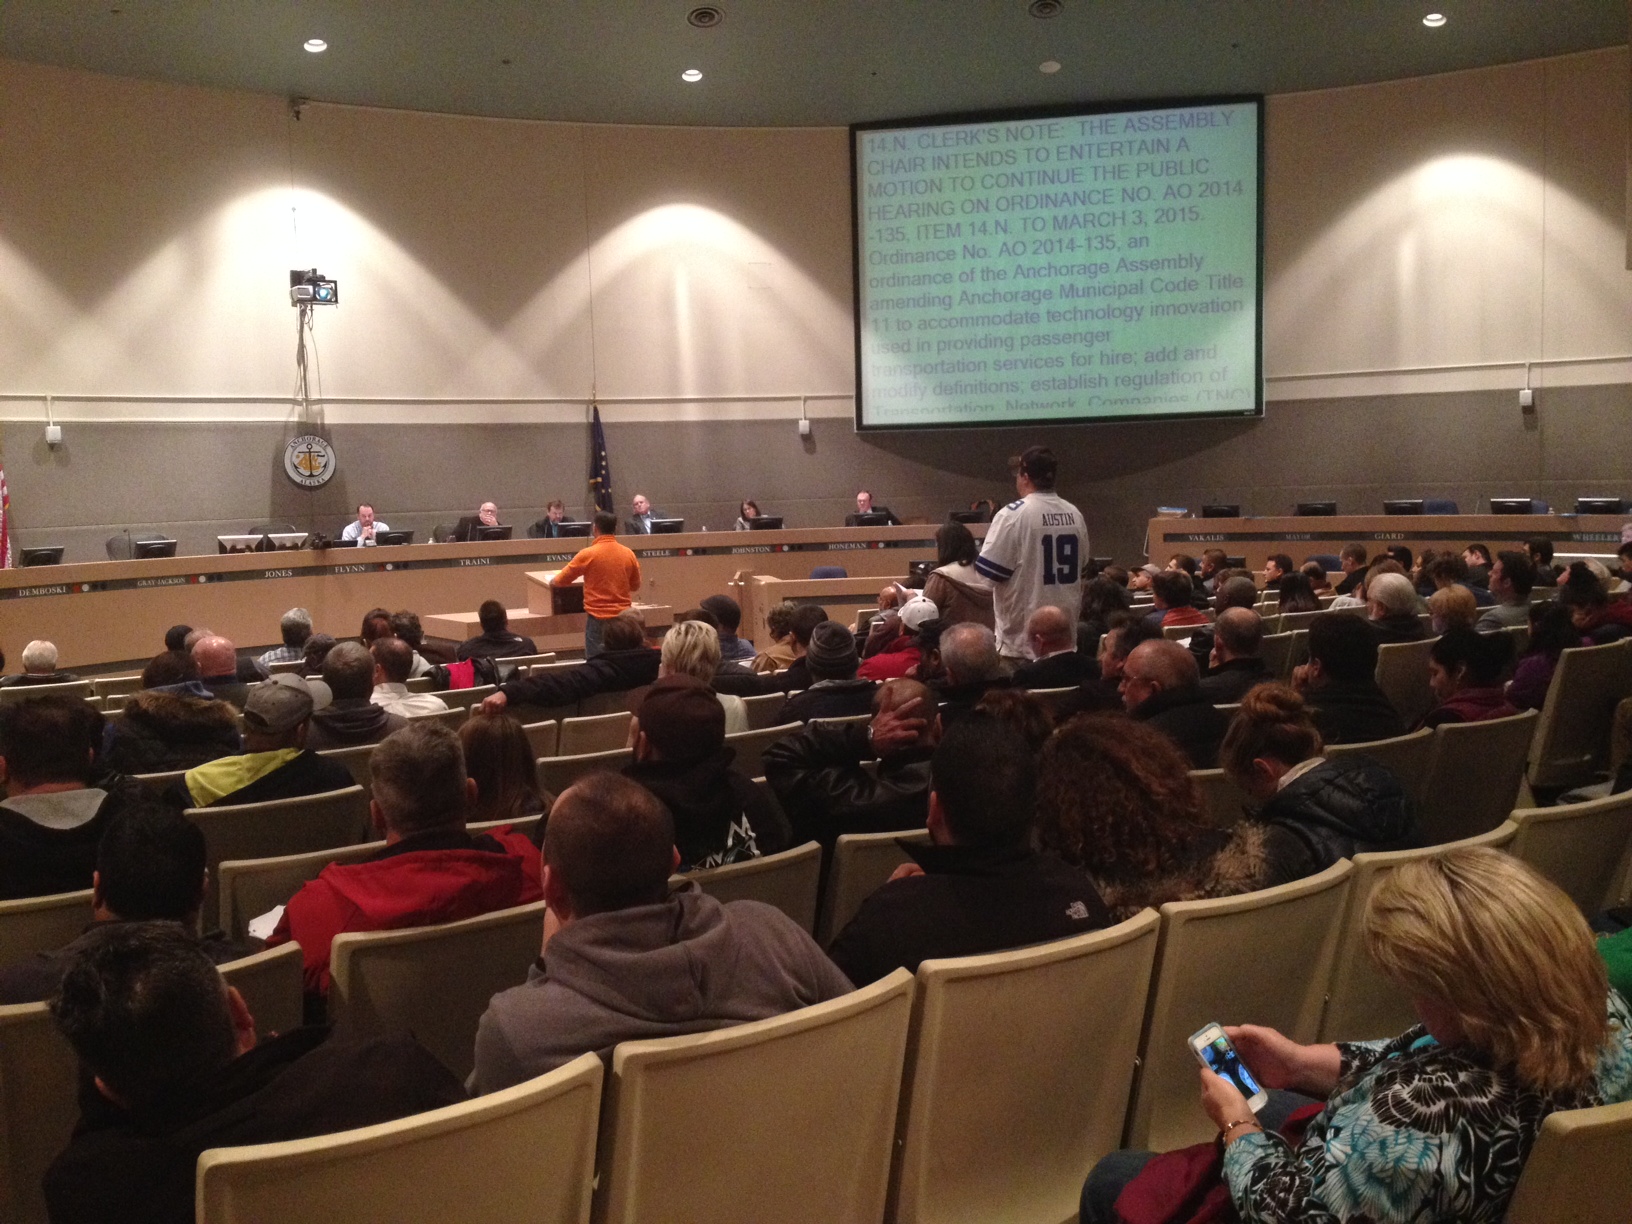 More than a hundred people attended Tuesday's Assembly meeting. Photo: KSKA.